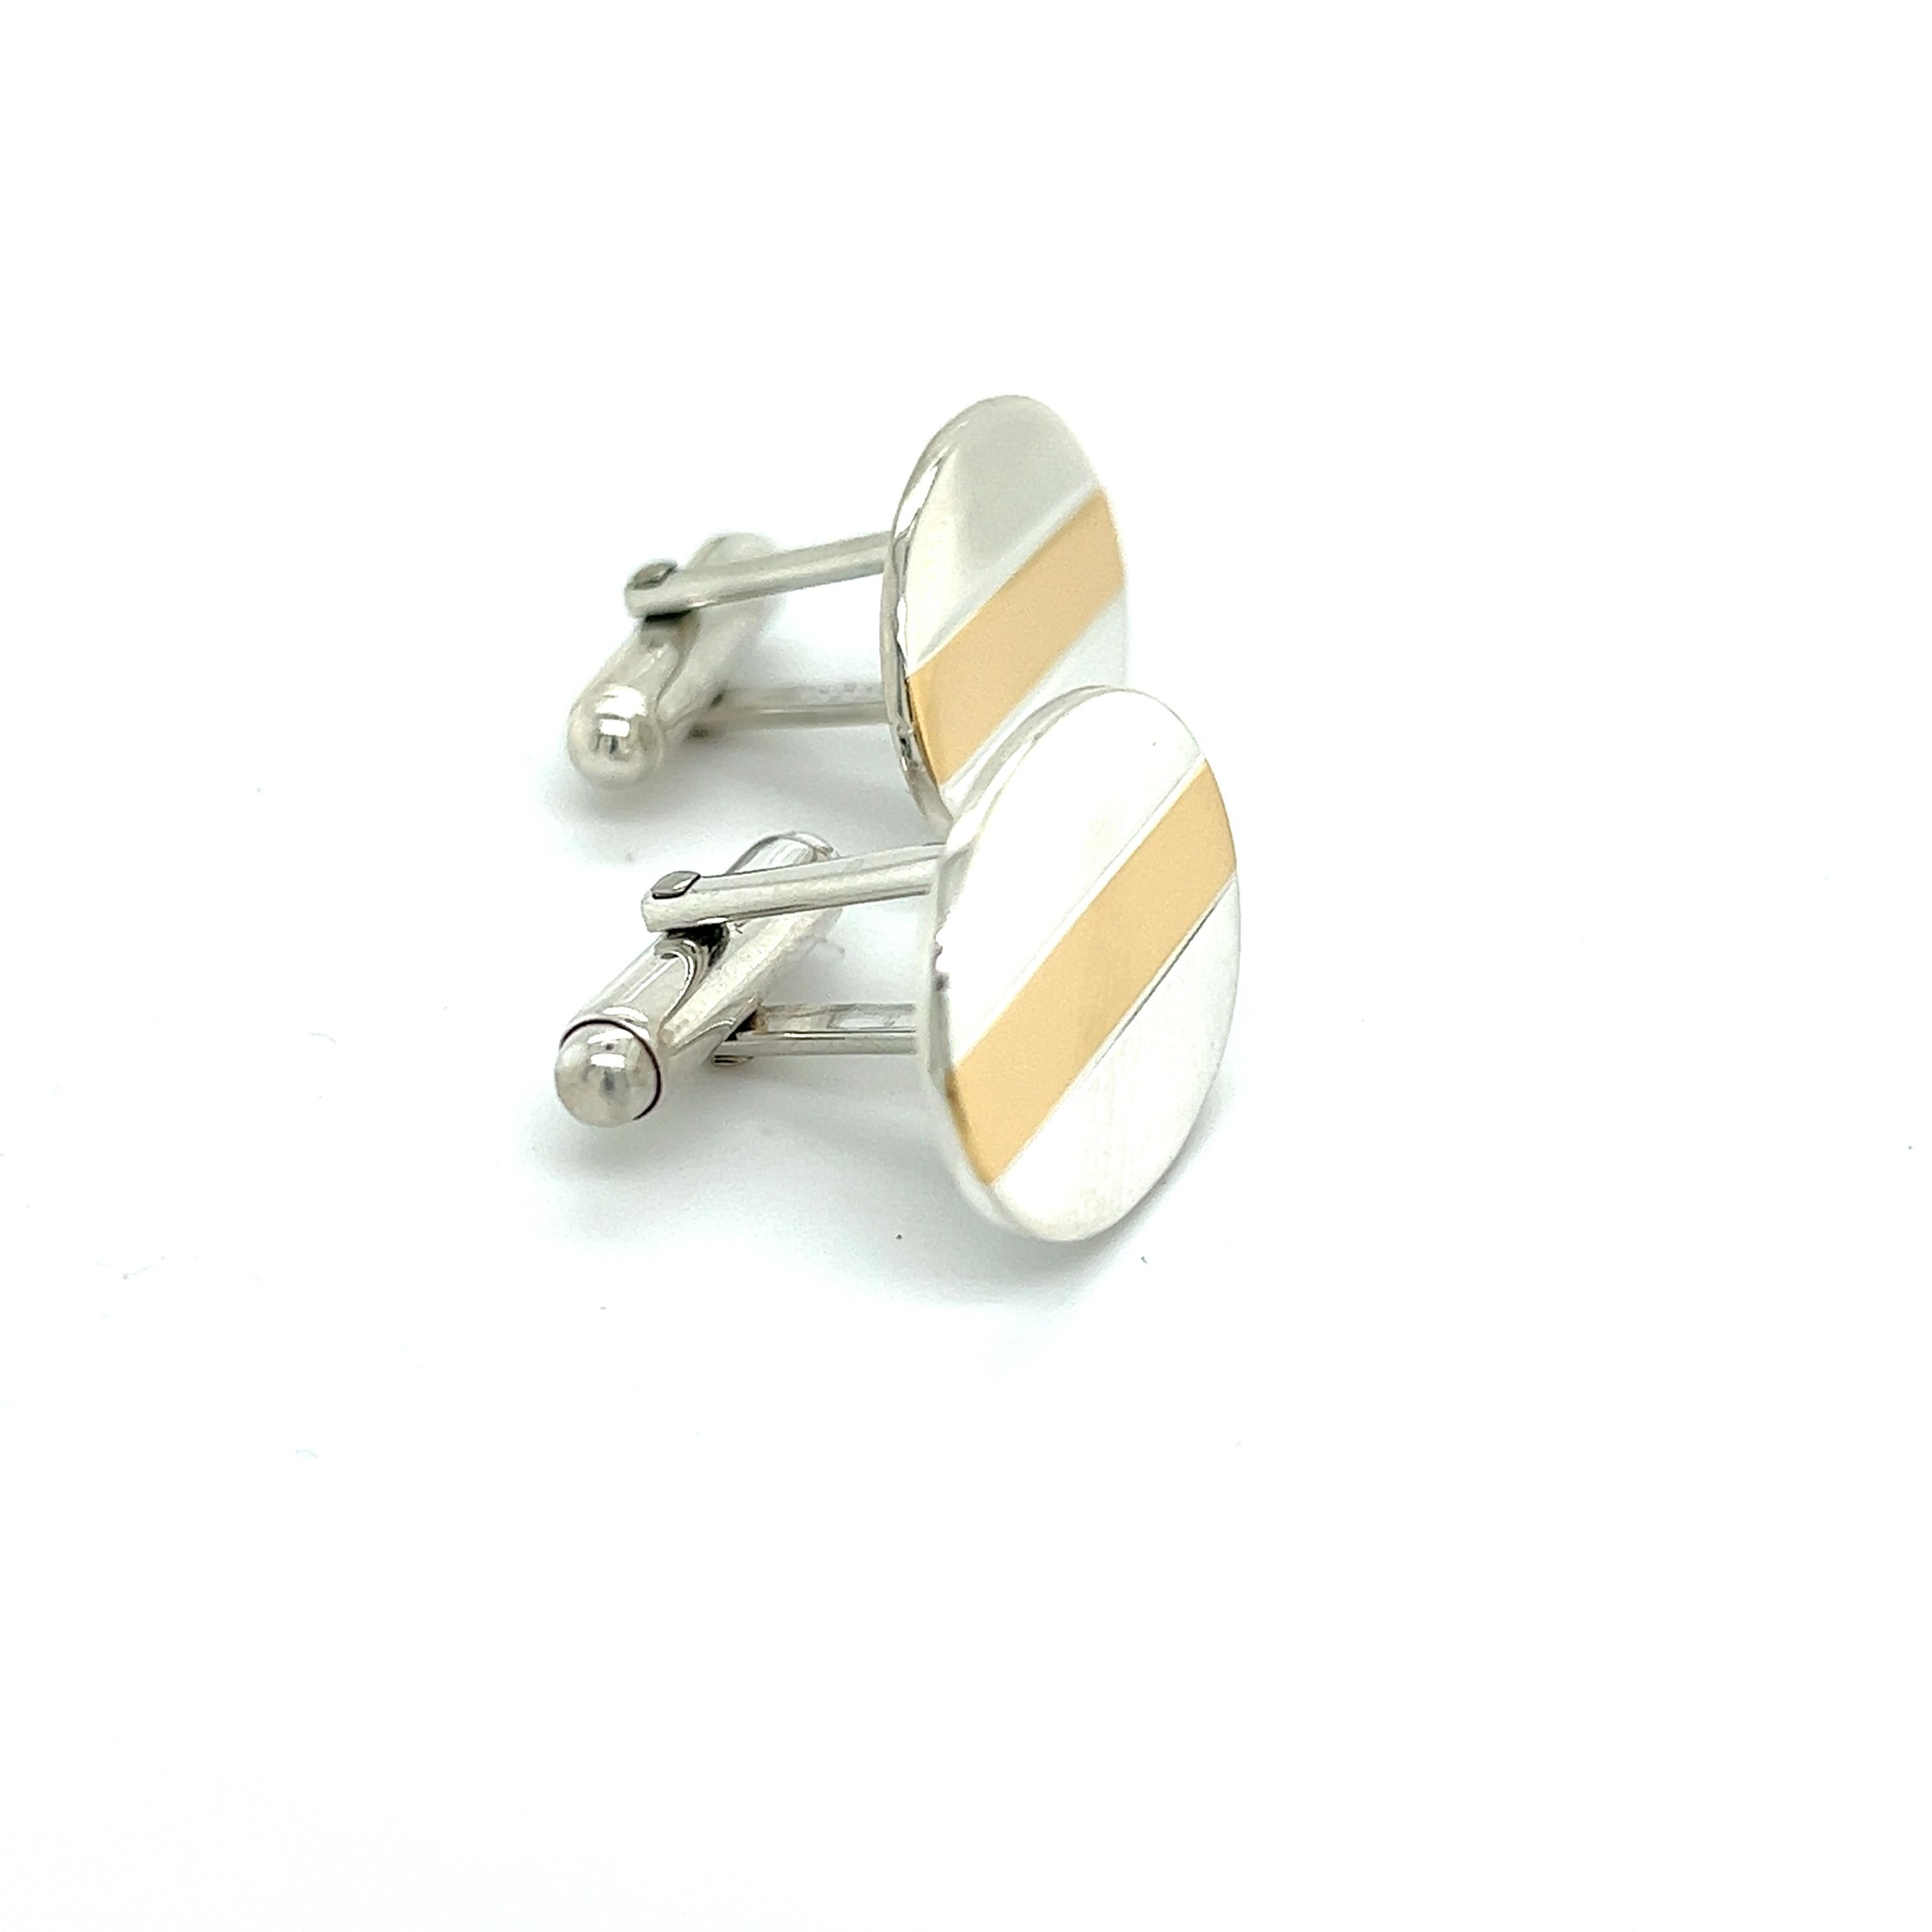 Authentic Tiffany & Co Estate Oval Cufflinks 18k YG + Sterling Silver TIF369

TRUSTED SELLER SINCE 2002

PLEASE SEE OUR HUNDREDS OF POSITIVE FEEDBACKS FROM OUR CLIENTS!!

FREE SHIPPING

DETAILS
Weight: 11 Grams
Metal: Sterling Silver & 18k Yellow